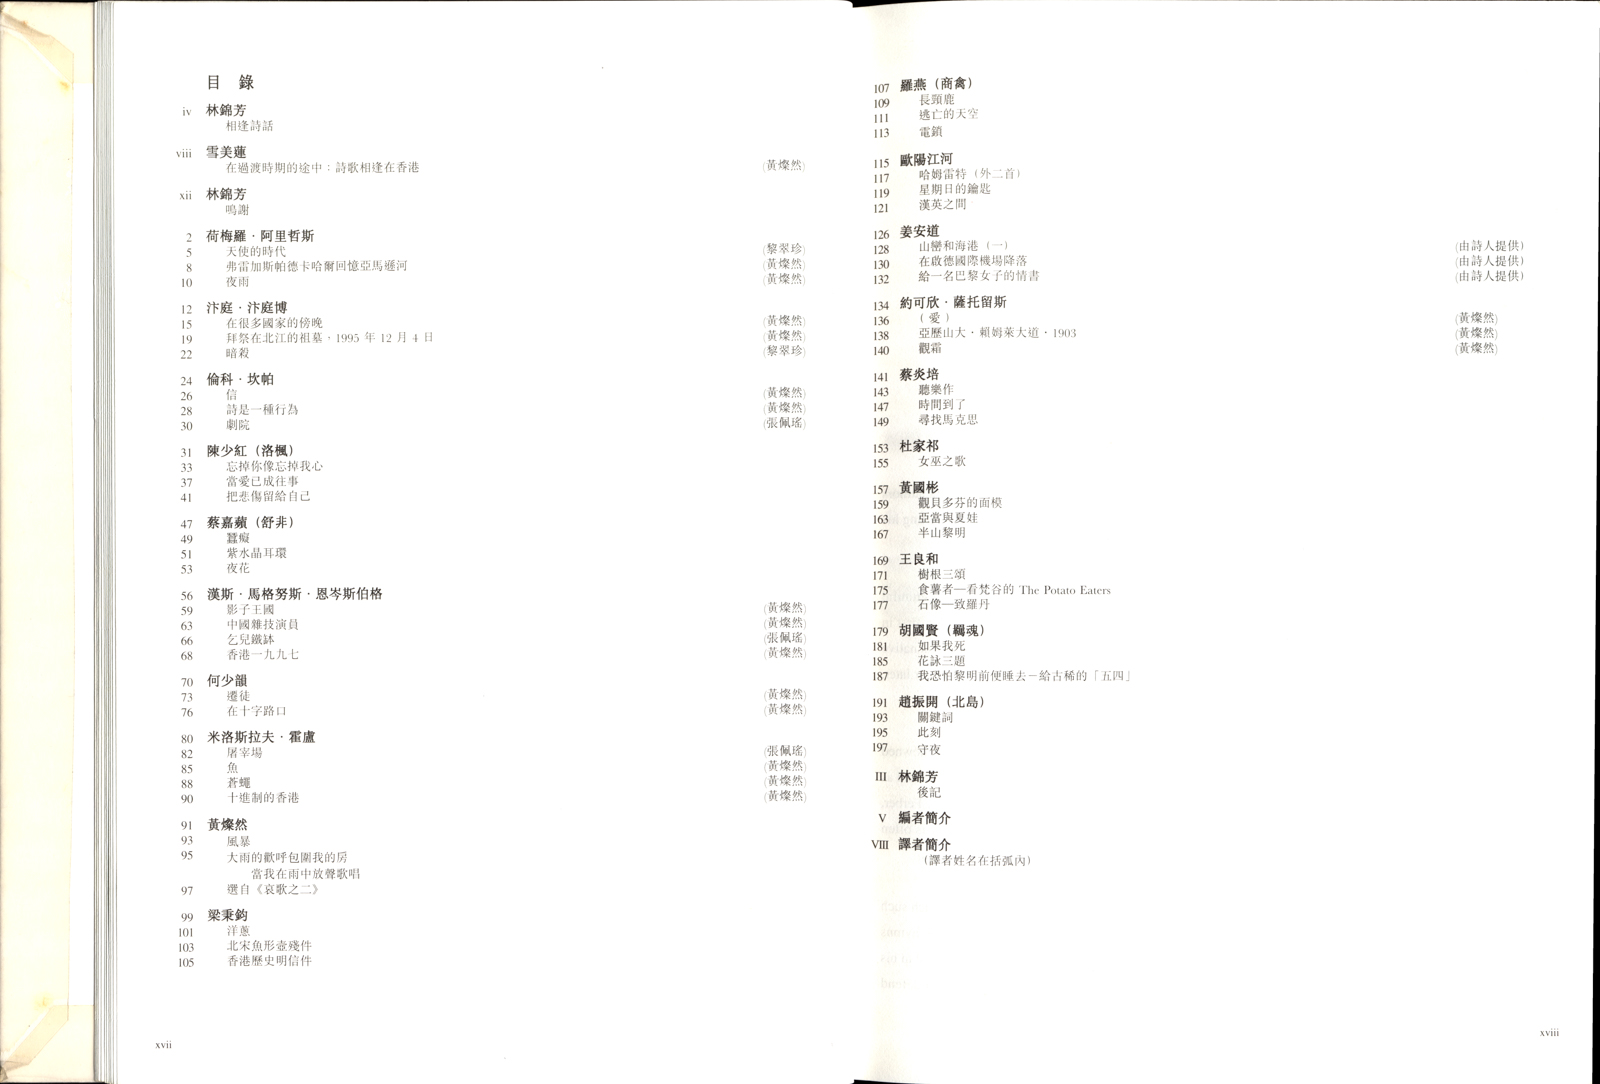 First Hong Kong International Poetry Festival - A Collection of Poems: Hong Kong in the Decimal System and HK1997